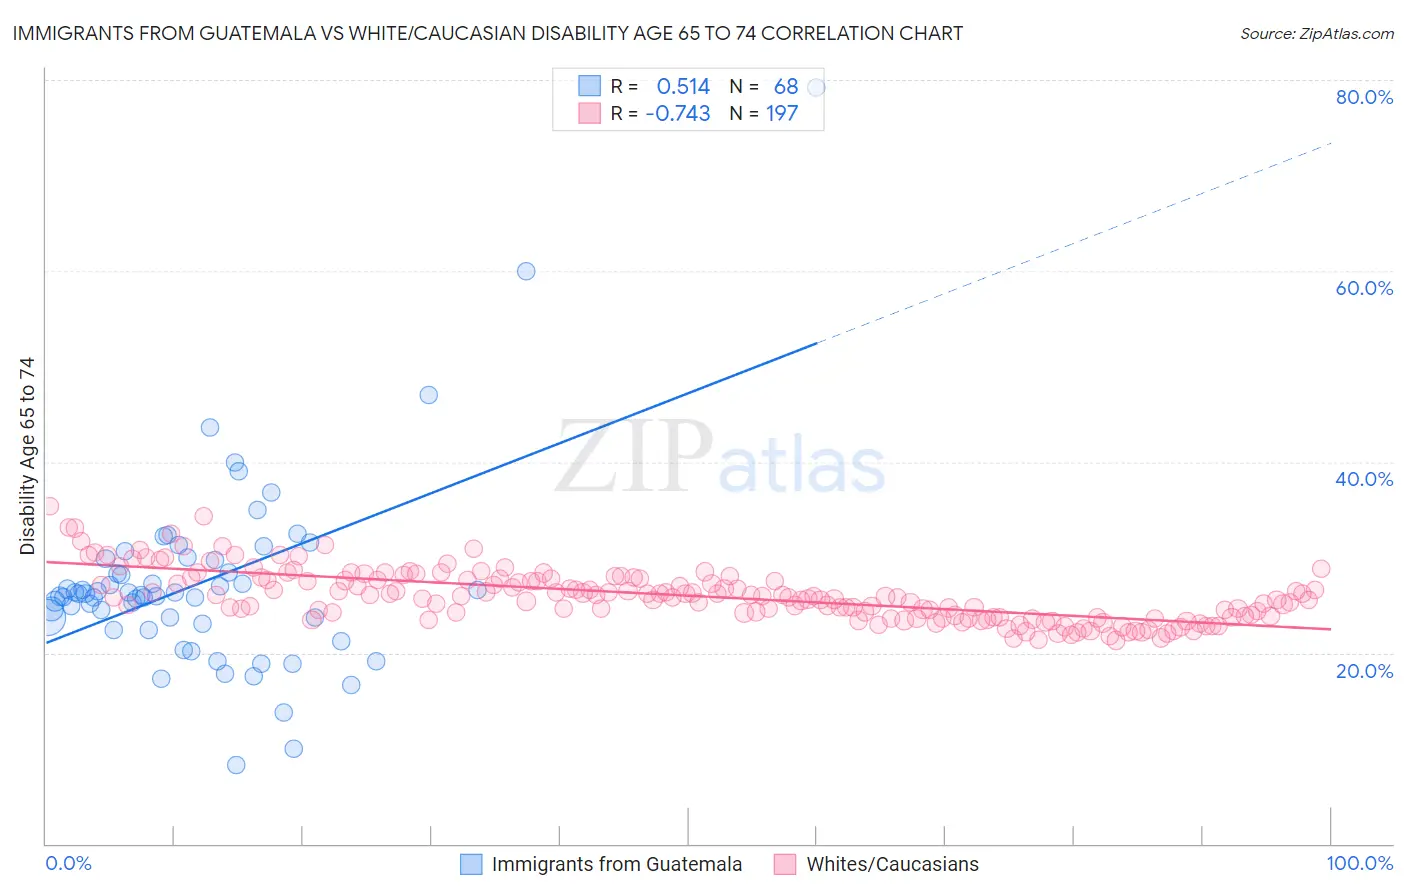 Immigrants from Guatemala vs White/Caucasian Disability Age 65 to 74